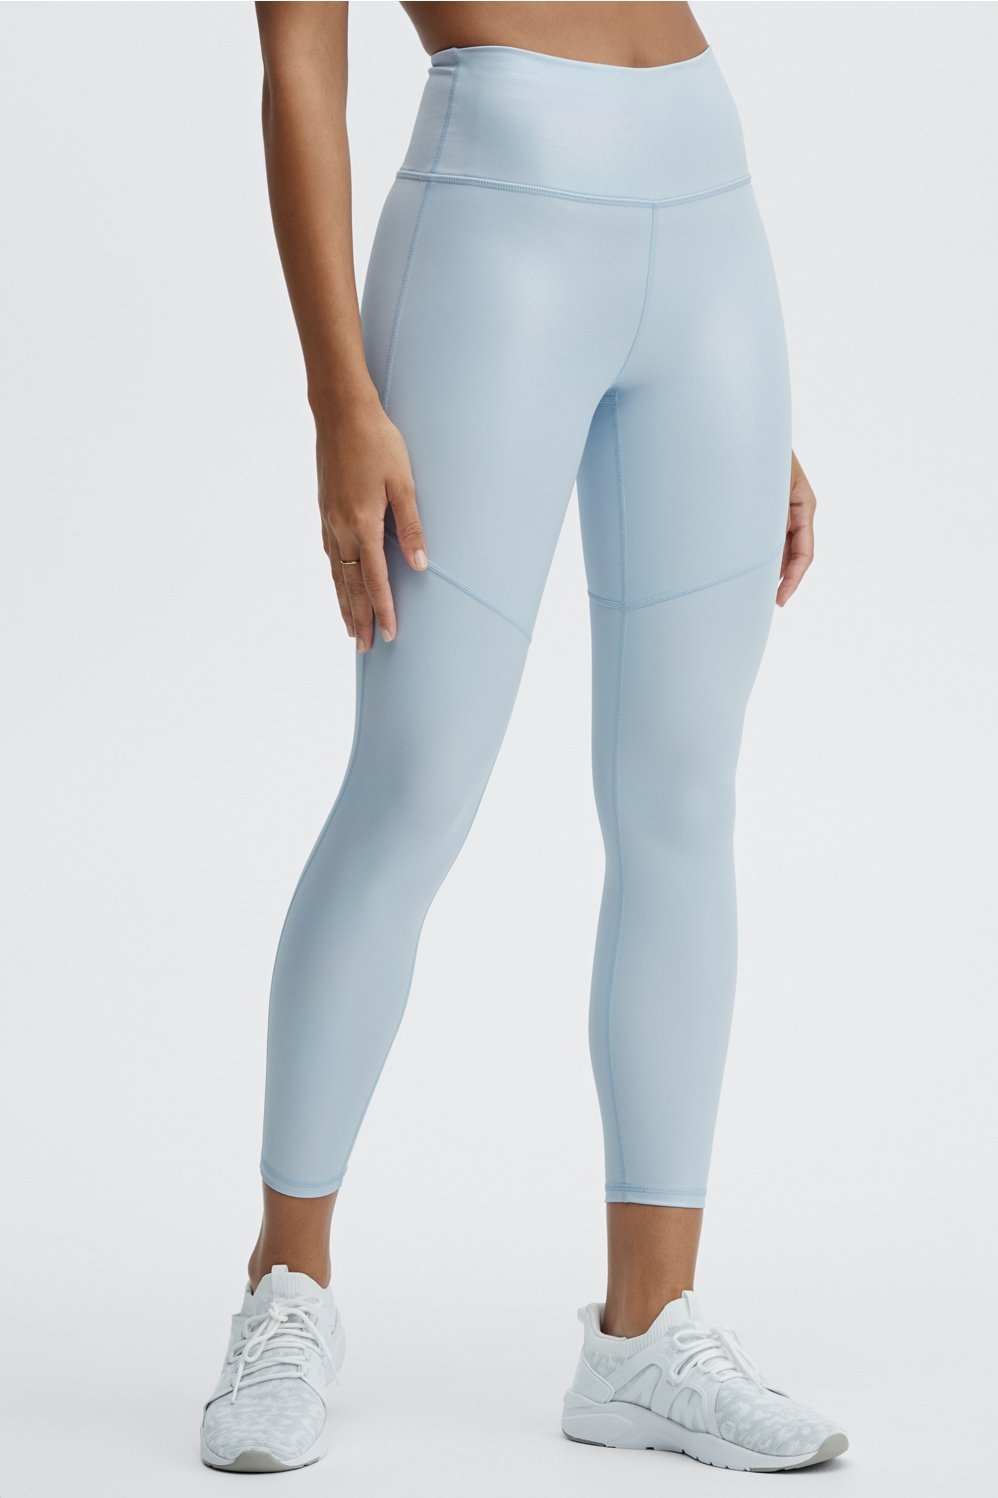 High-Waisted PureLuxe Pocket 7/8